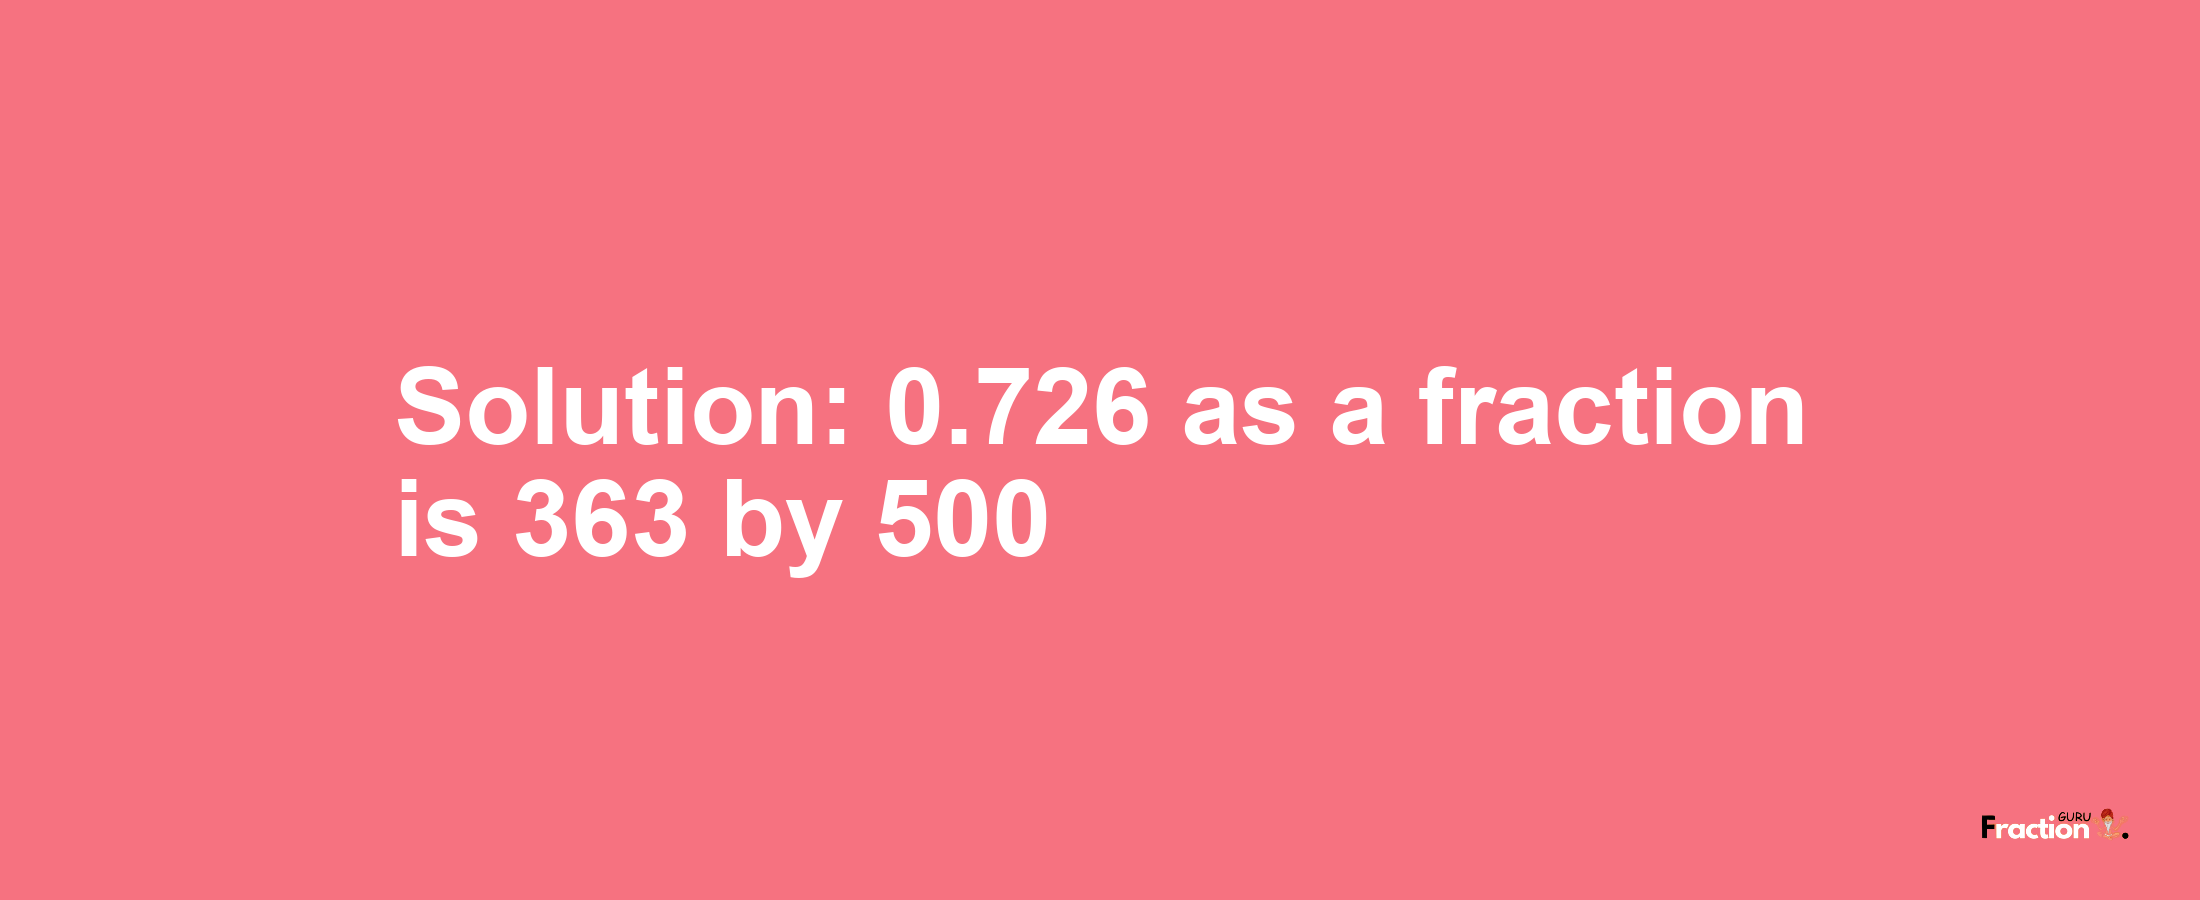 Solution:0.726 as a fraction is 363/500